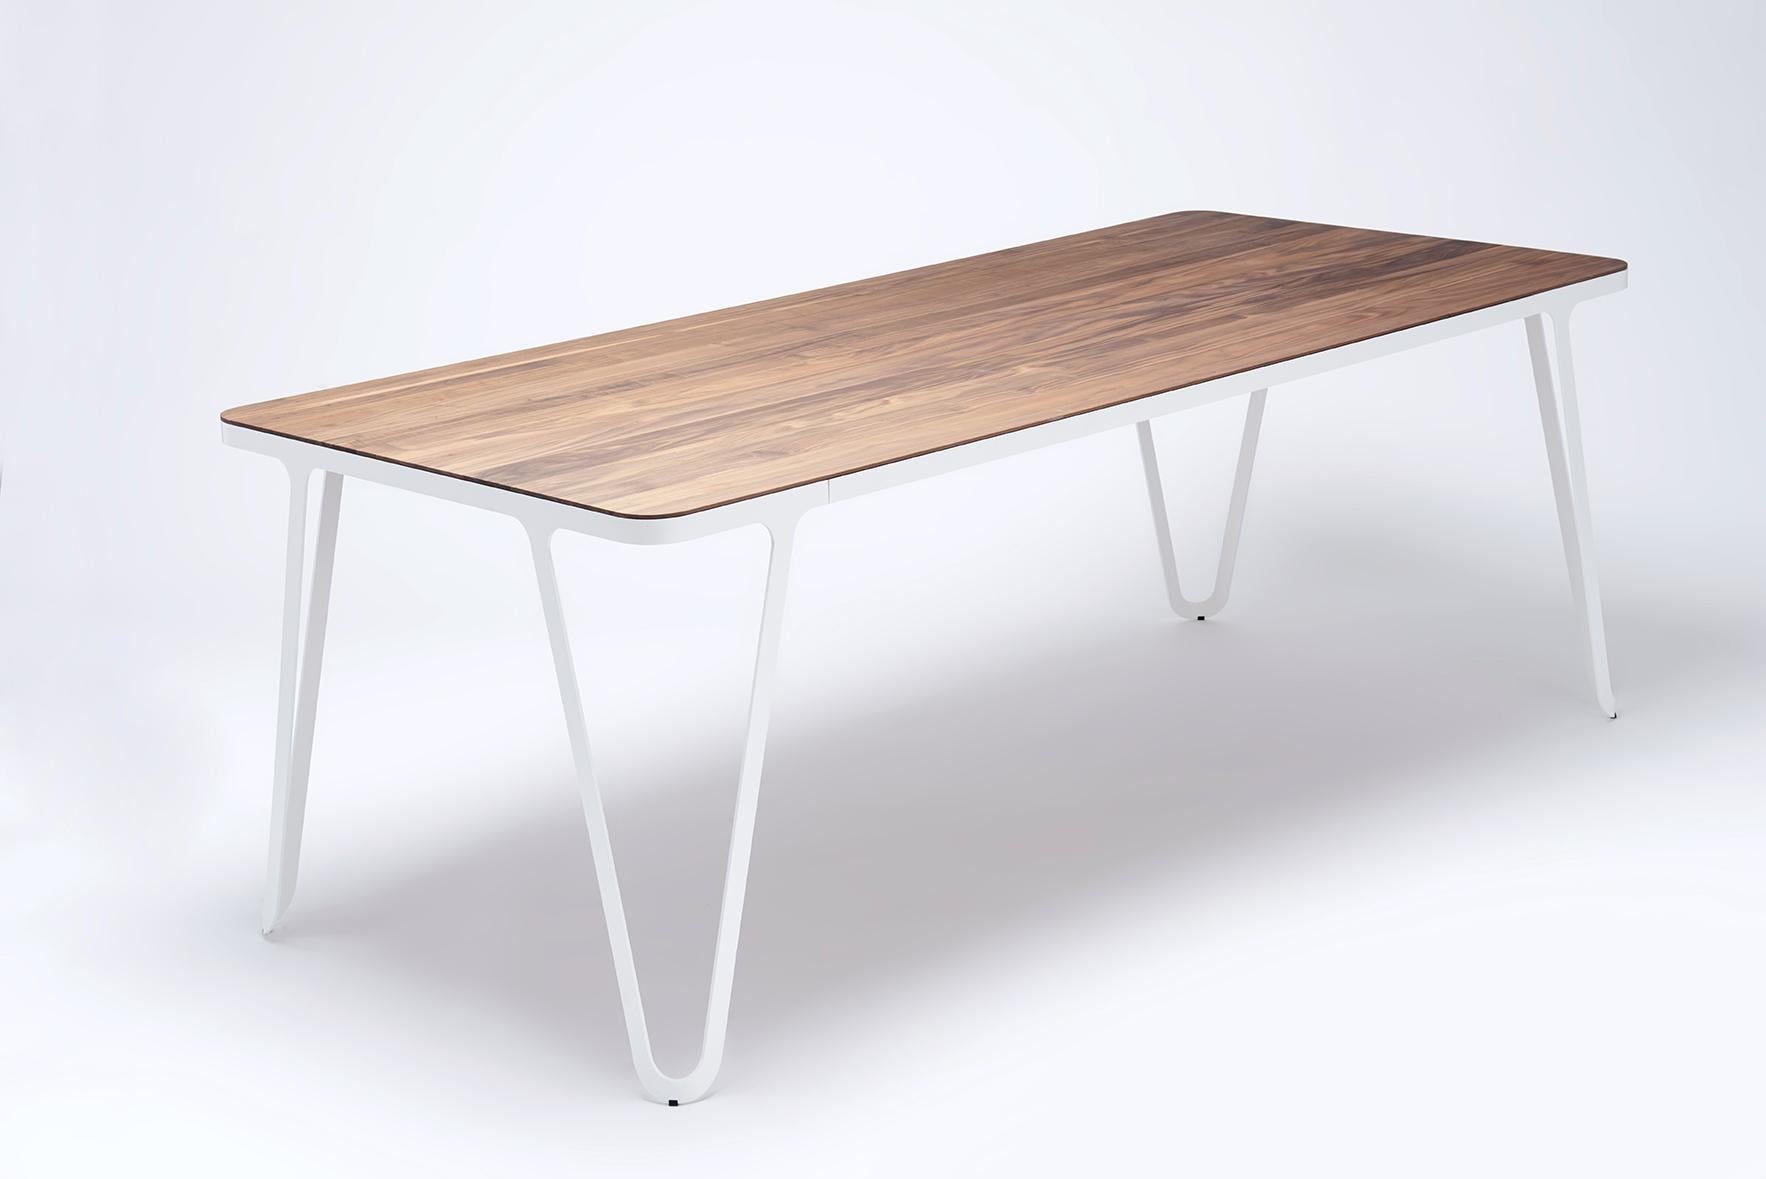 Loop table 240 walnut by Sebastian Scherer
Dimensions: D240 x W90 x H74 cm
Materials: walnut, aluminium, wood
Weight: 69.2 kg
Also available: colors: solid wood (matt lacquered or oiled): black and white stained ash / natural oak / american